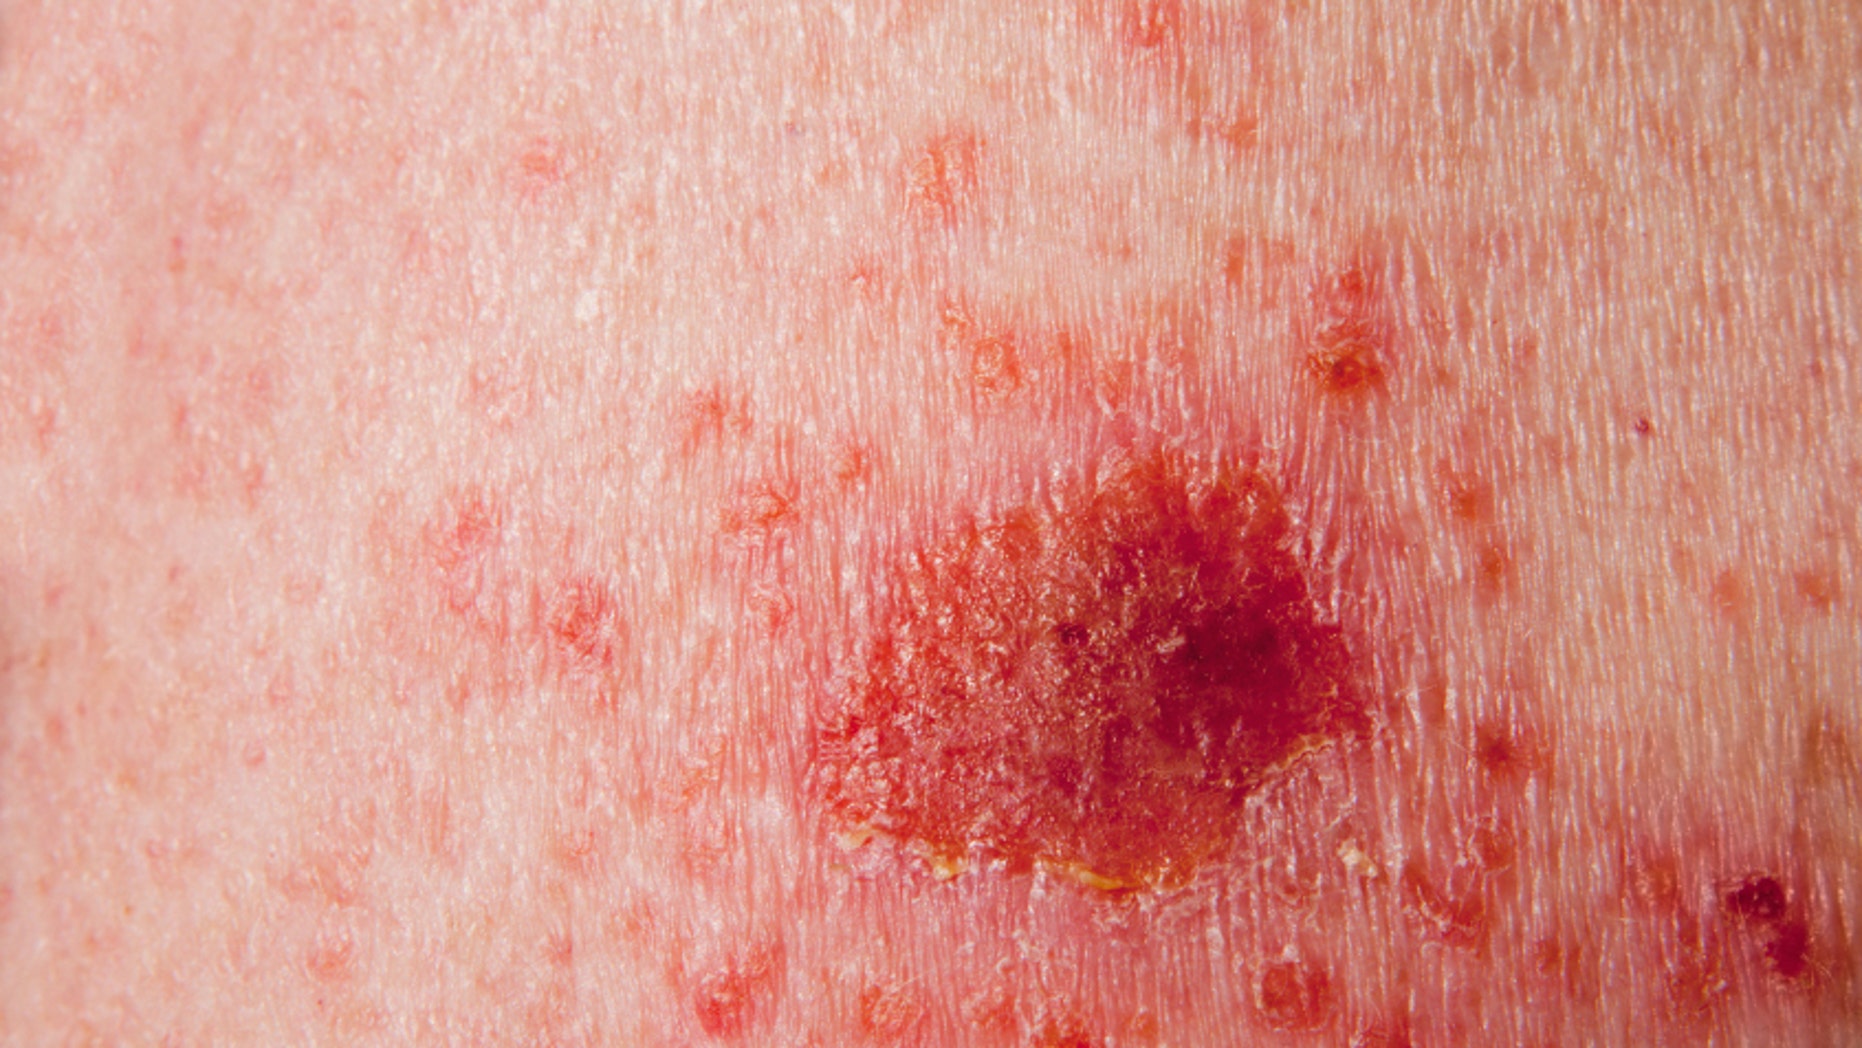 pictures of skin cancers